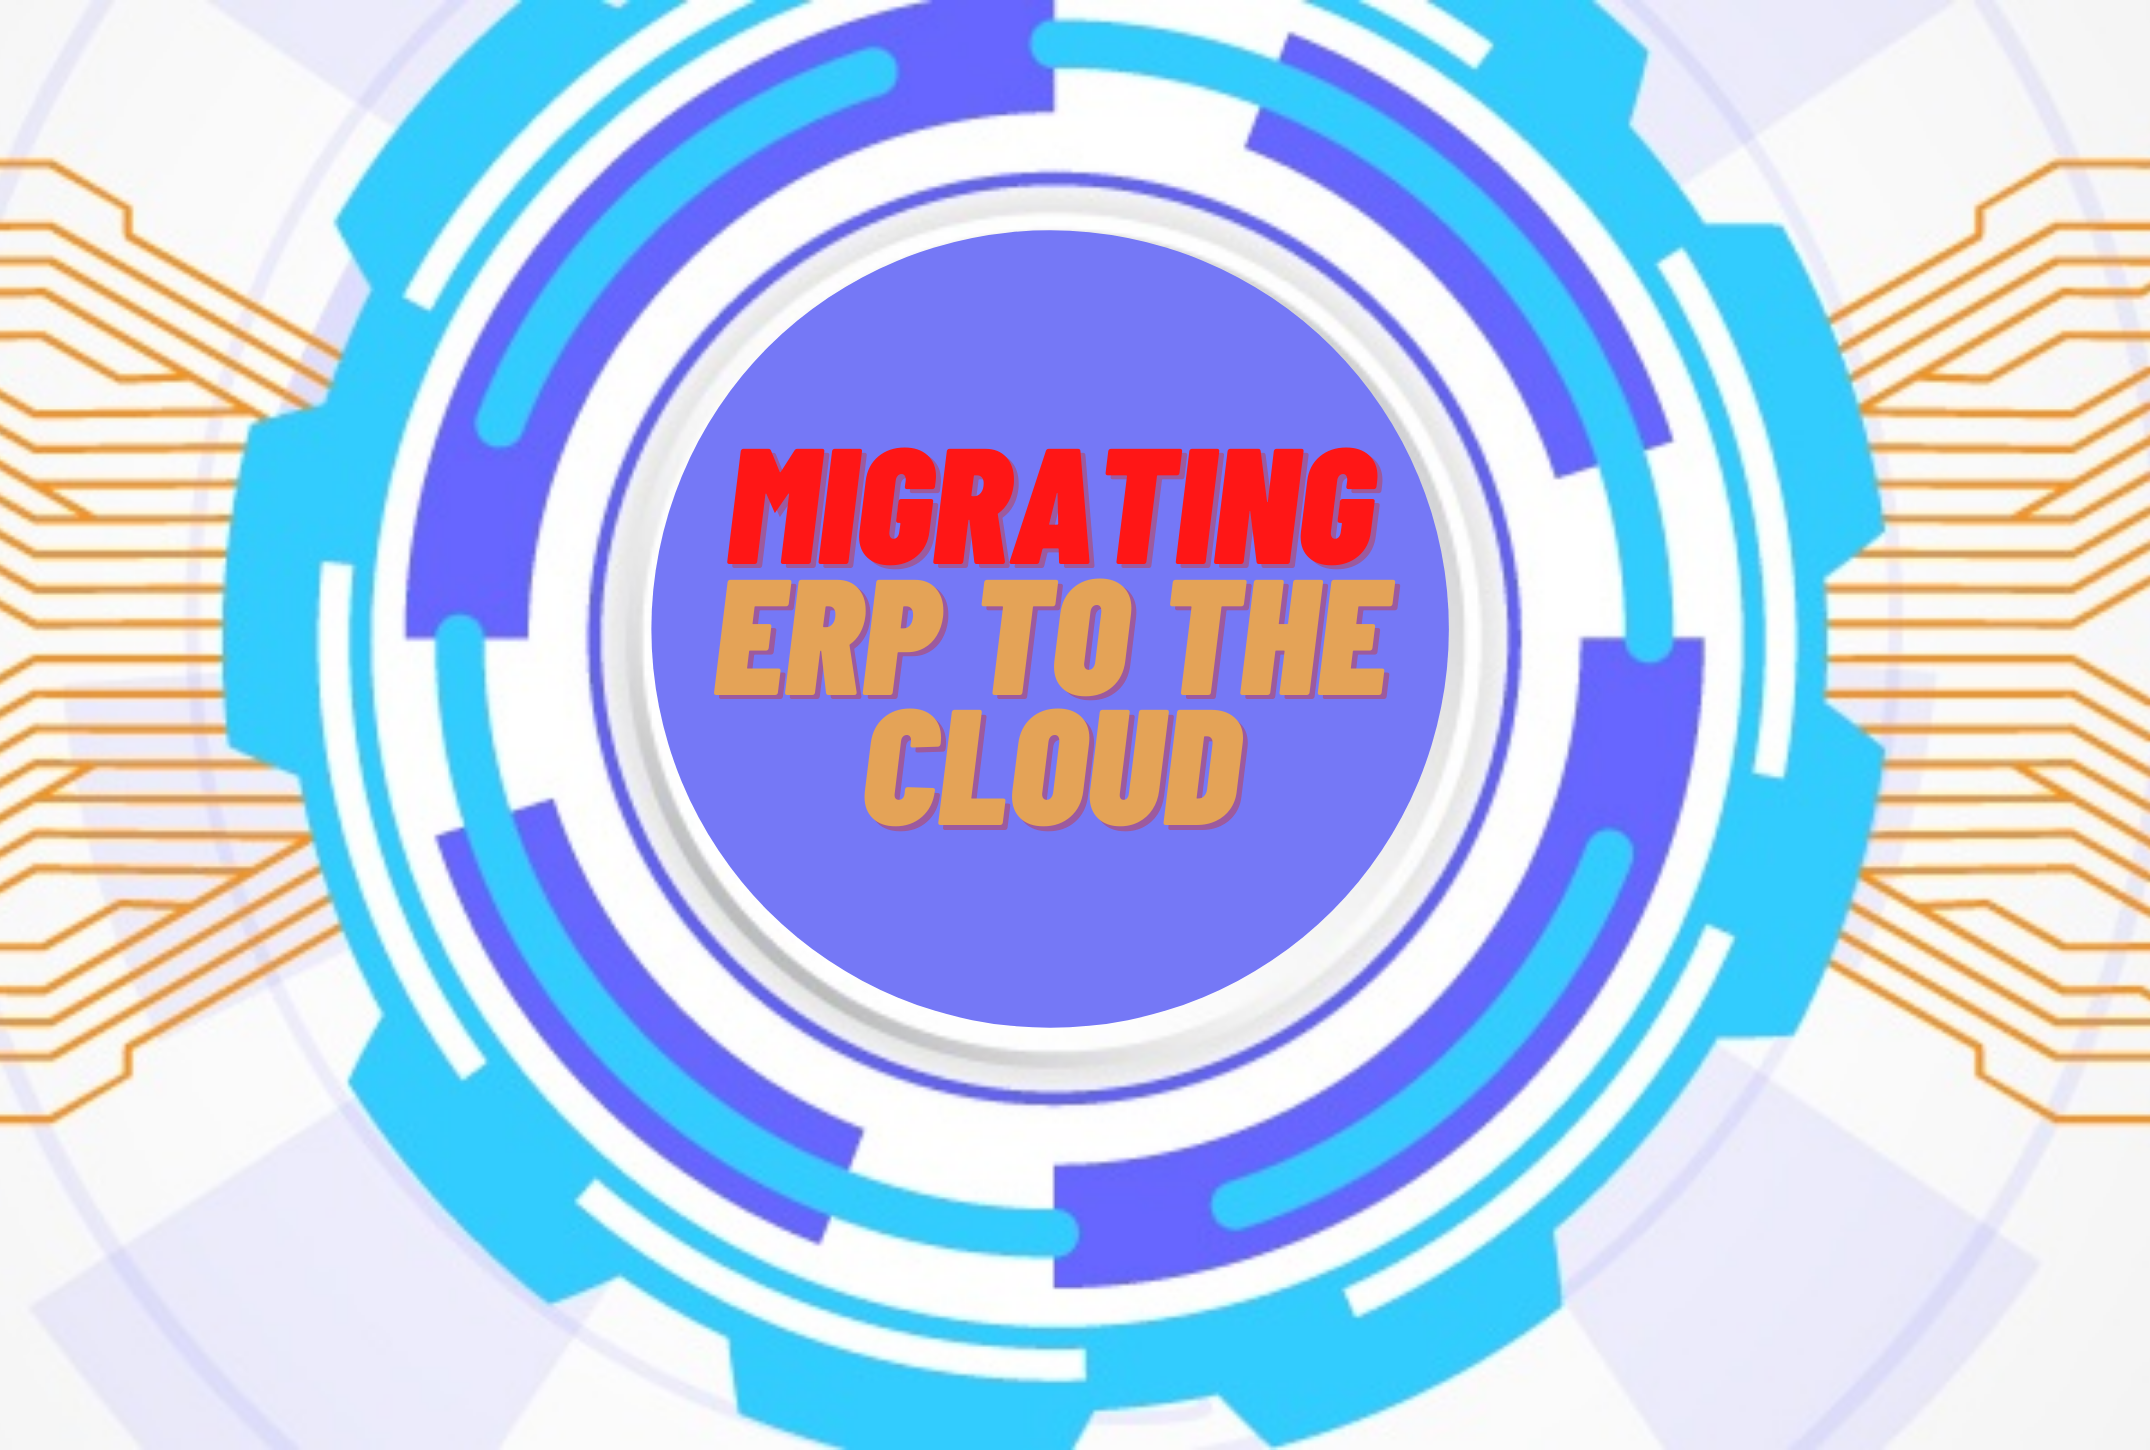 Migrating ERP to the Cloud